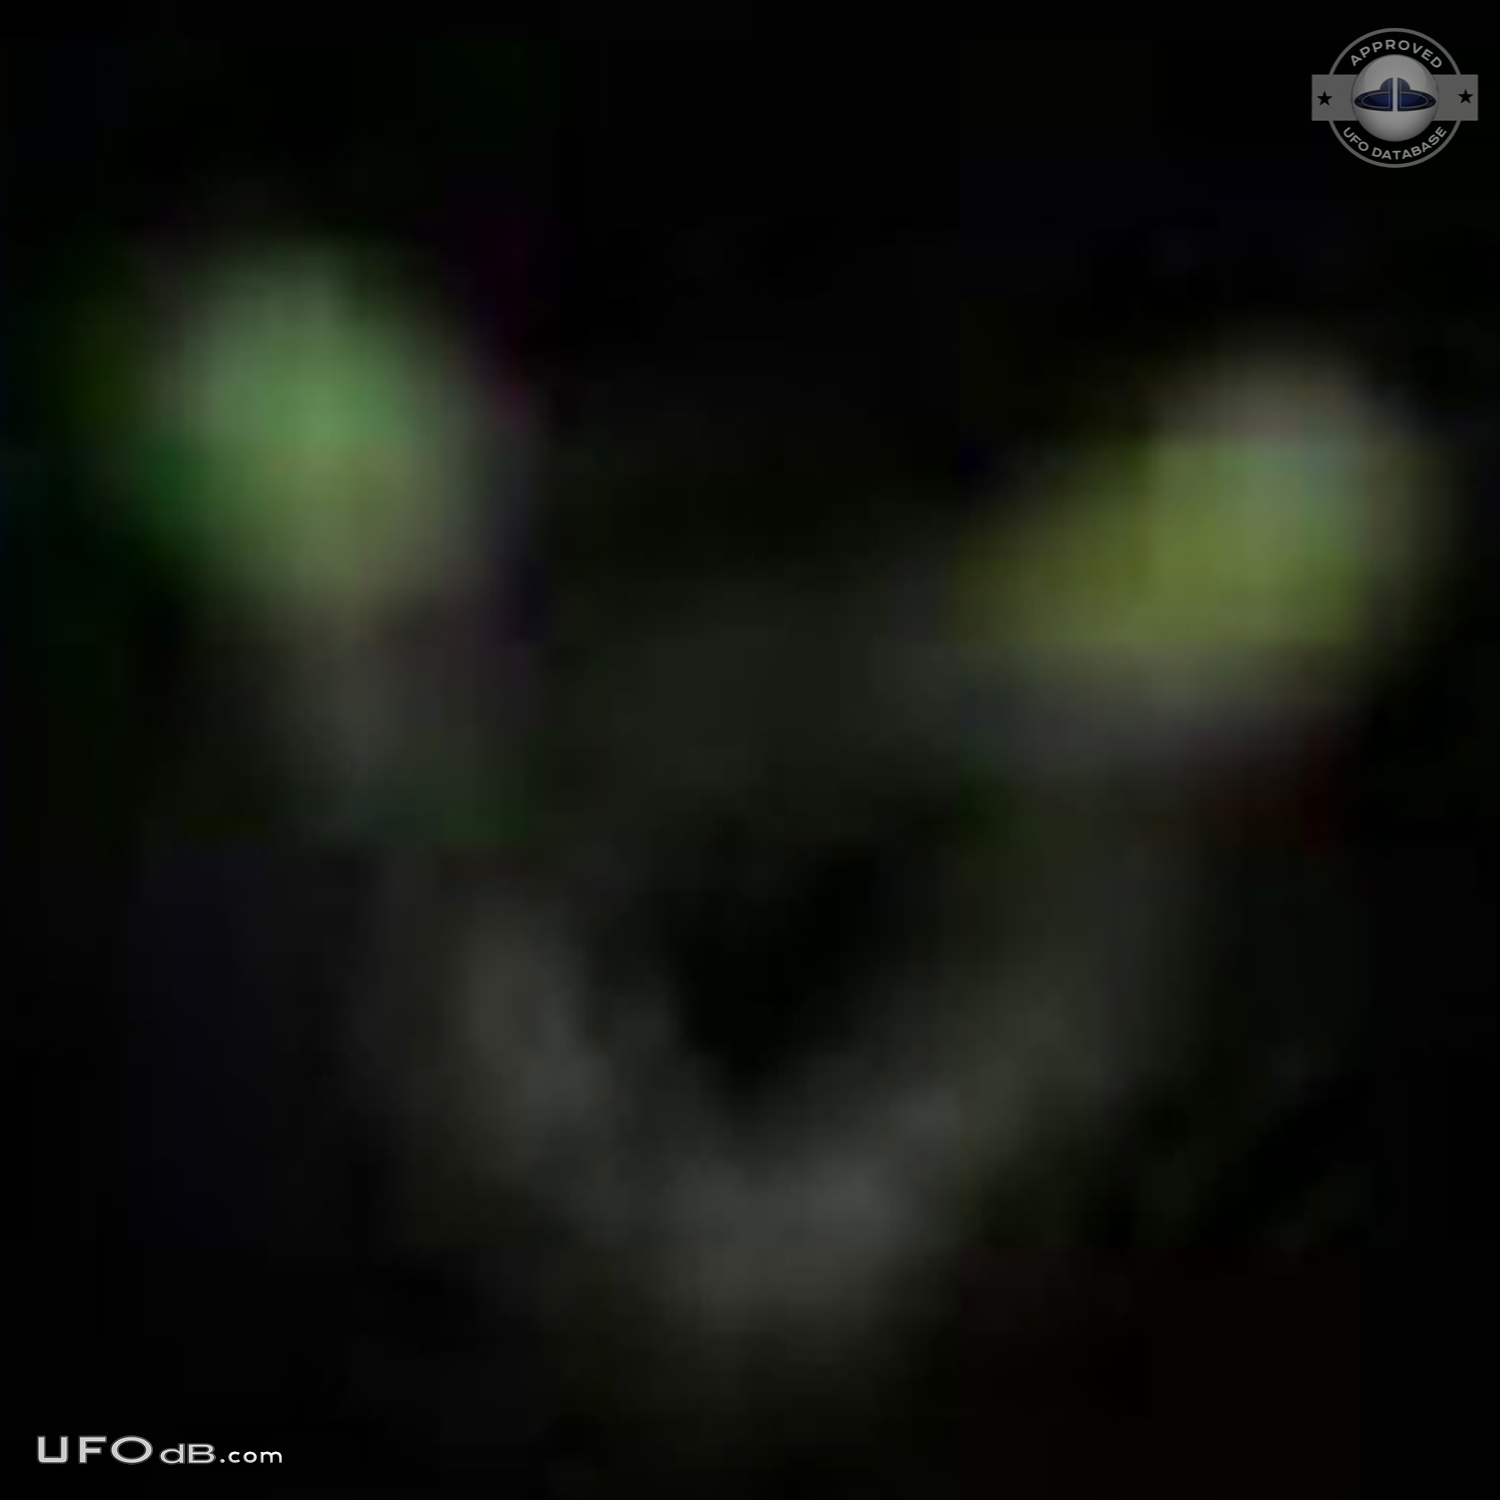 Silent UFO seen near woodland area Huddersfield UK on May 2011 UFO Picture #641-5